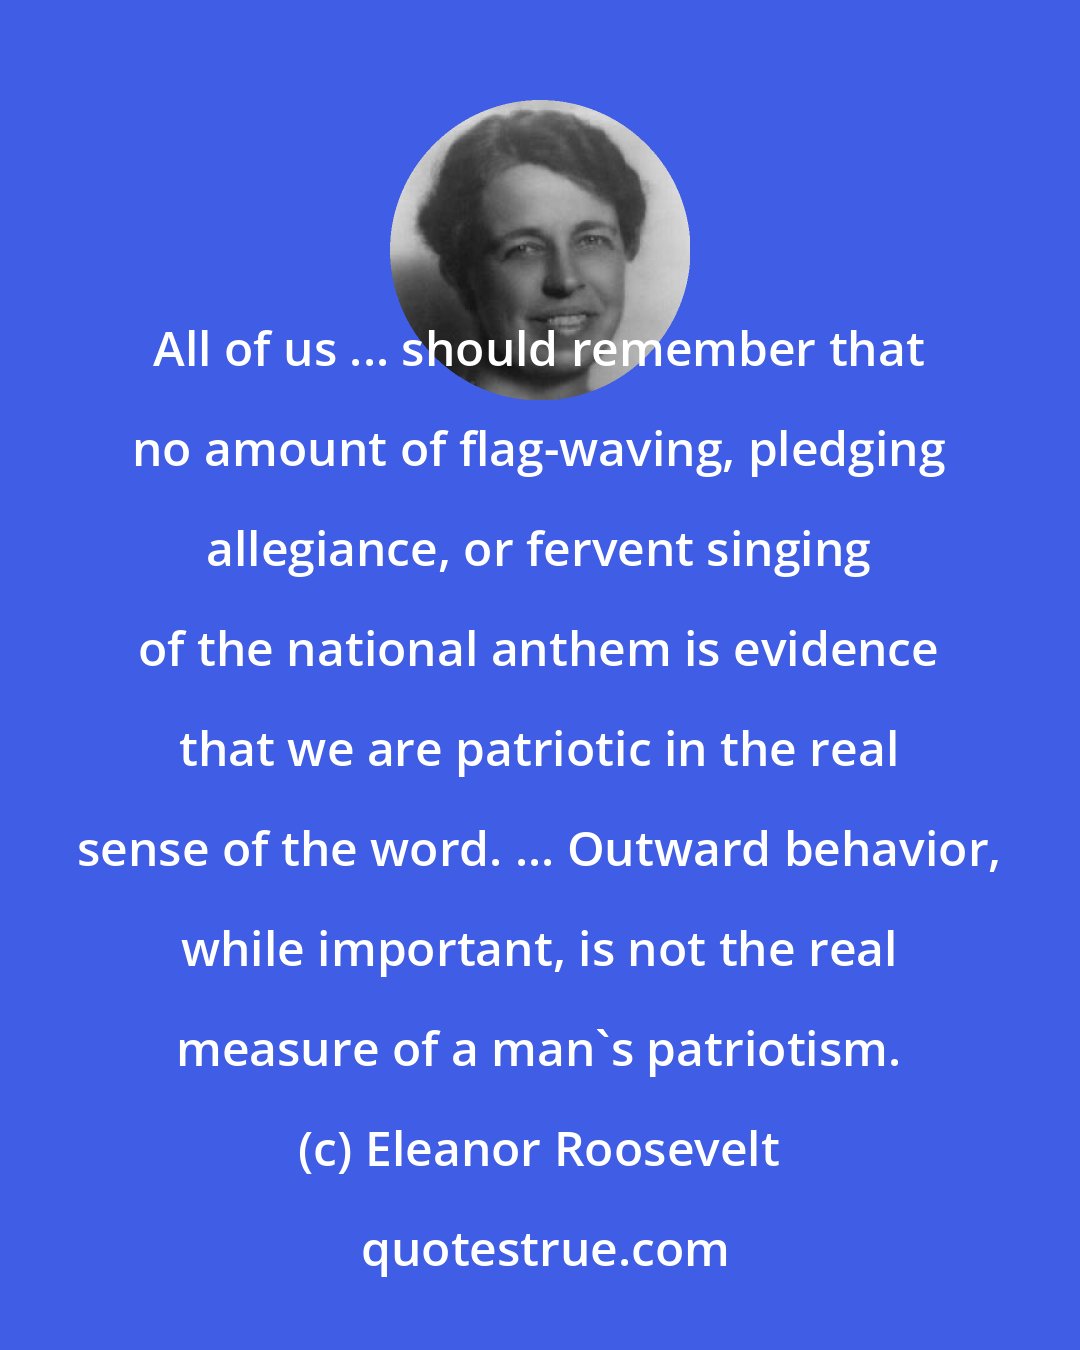 Eleanor Roosevelt: All of us ... should remember that no amount of flag-waving, pledging allegiance, or fervent singing of the national anthem is evidence that we are patriotic in the real sense of the word. ... Outward behavior, while important, is not the real measure of a man's patriotism.